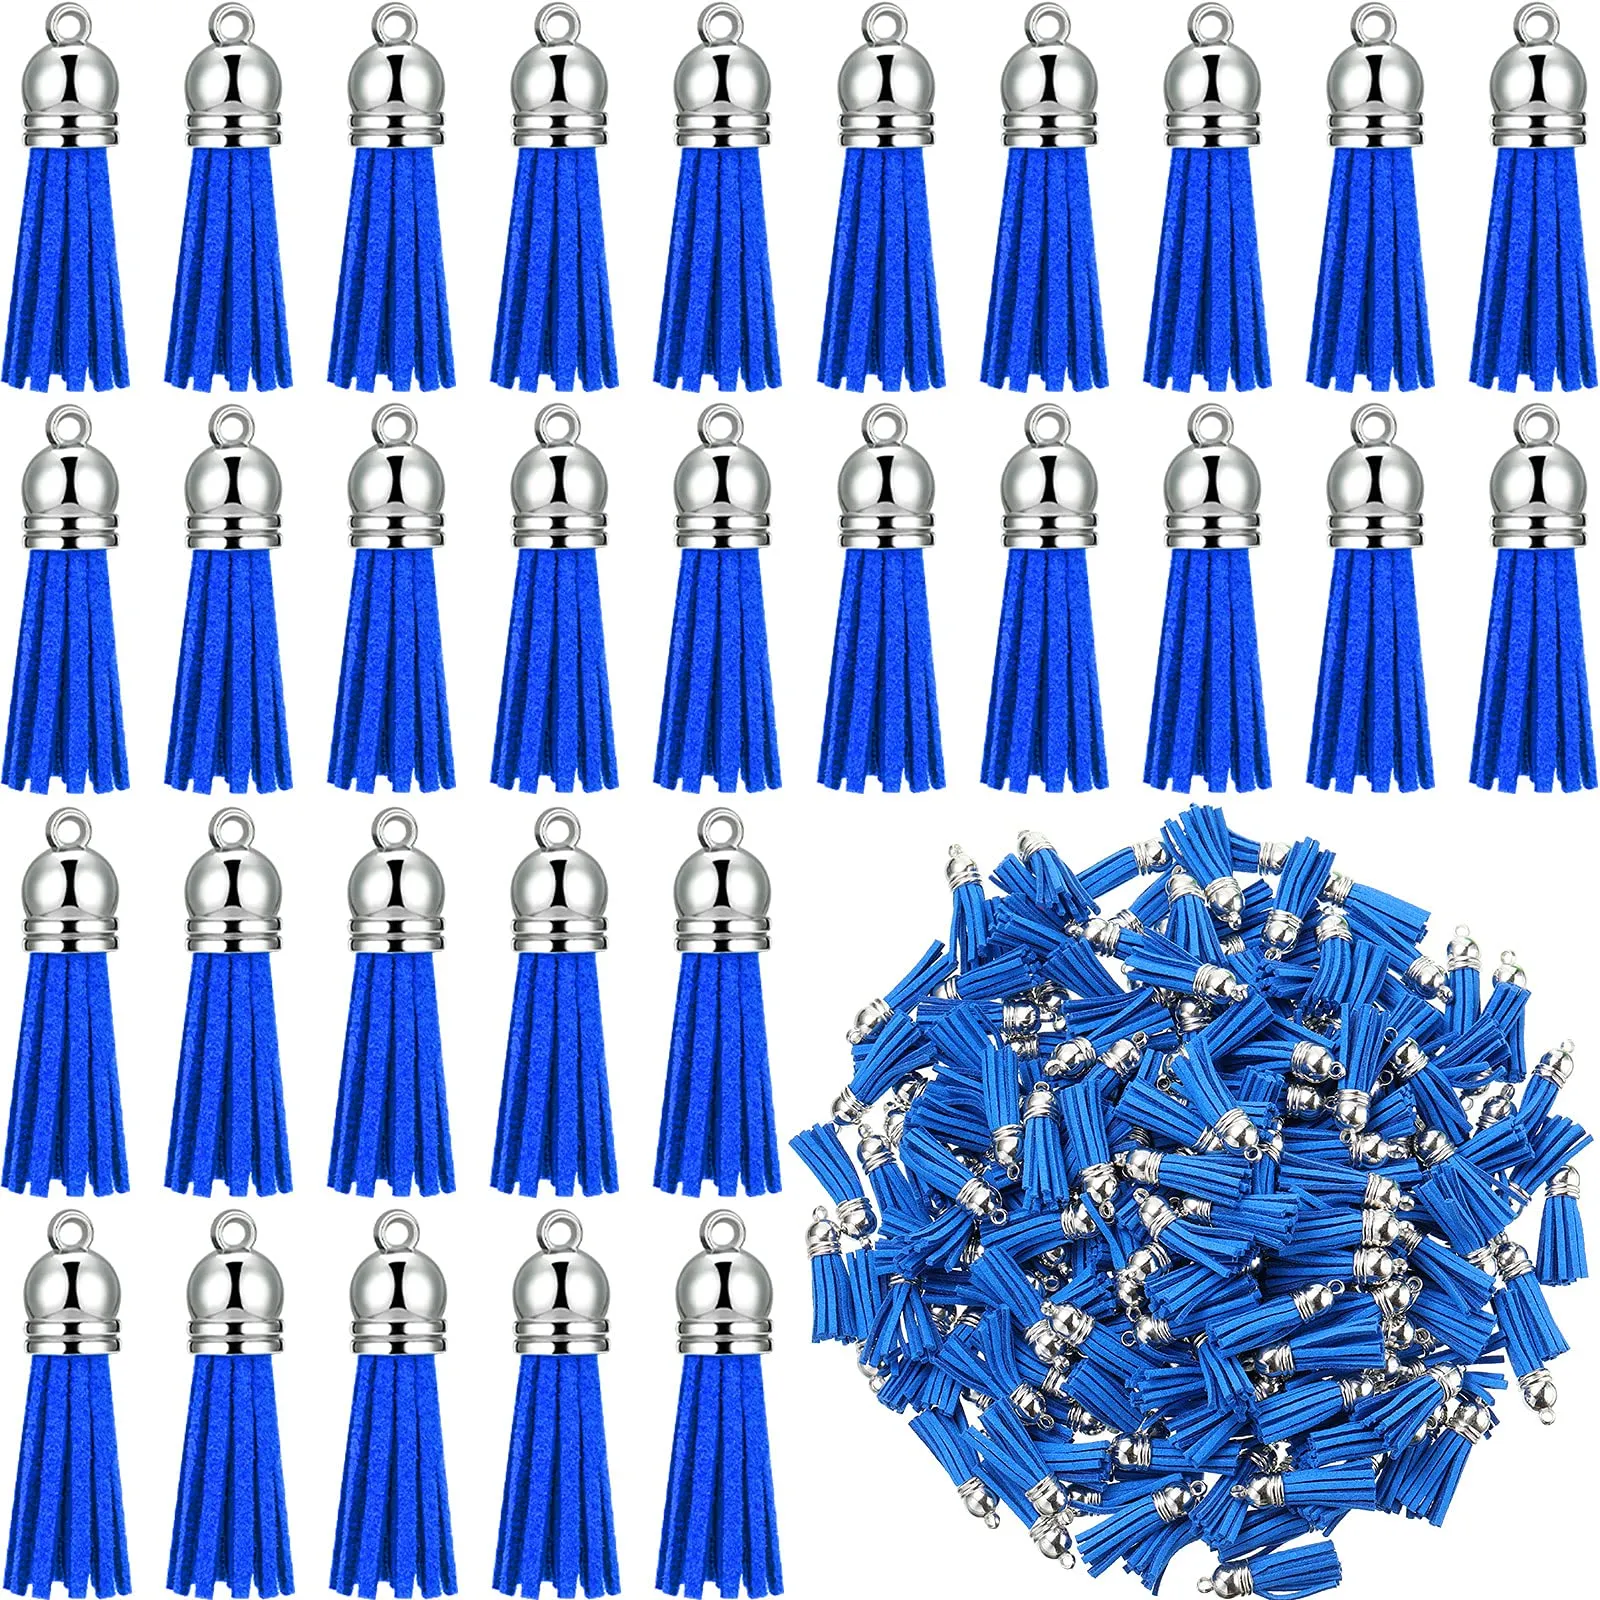 Charms Keychain Tassels Faux Suede Leather Tassel Pendants Decoration With Loop For Diy Crafts Making Supplies Blue amevw